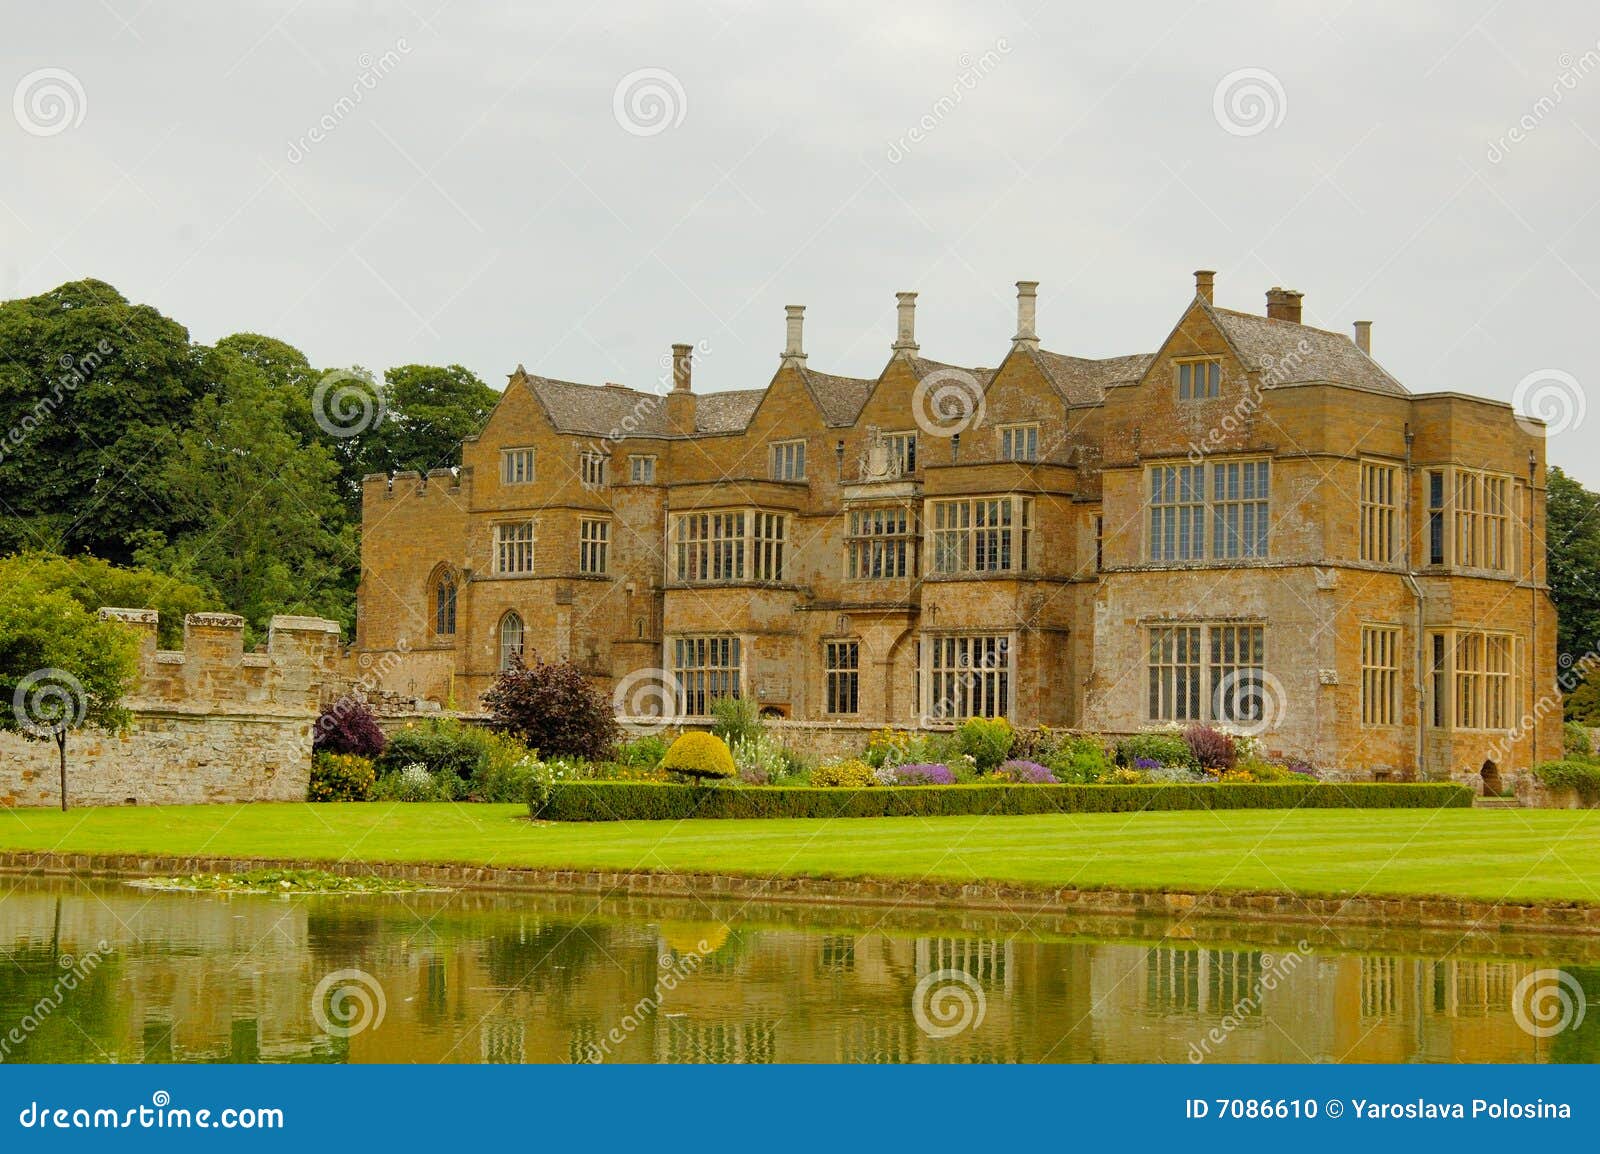 Moat And Manor House In The Medieval Castle Stock Photo Image Of England Detail